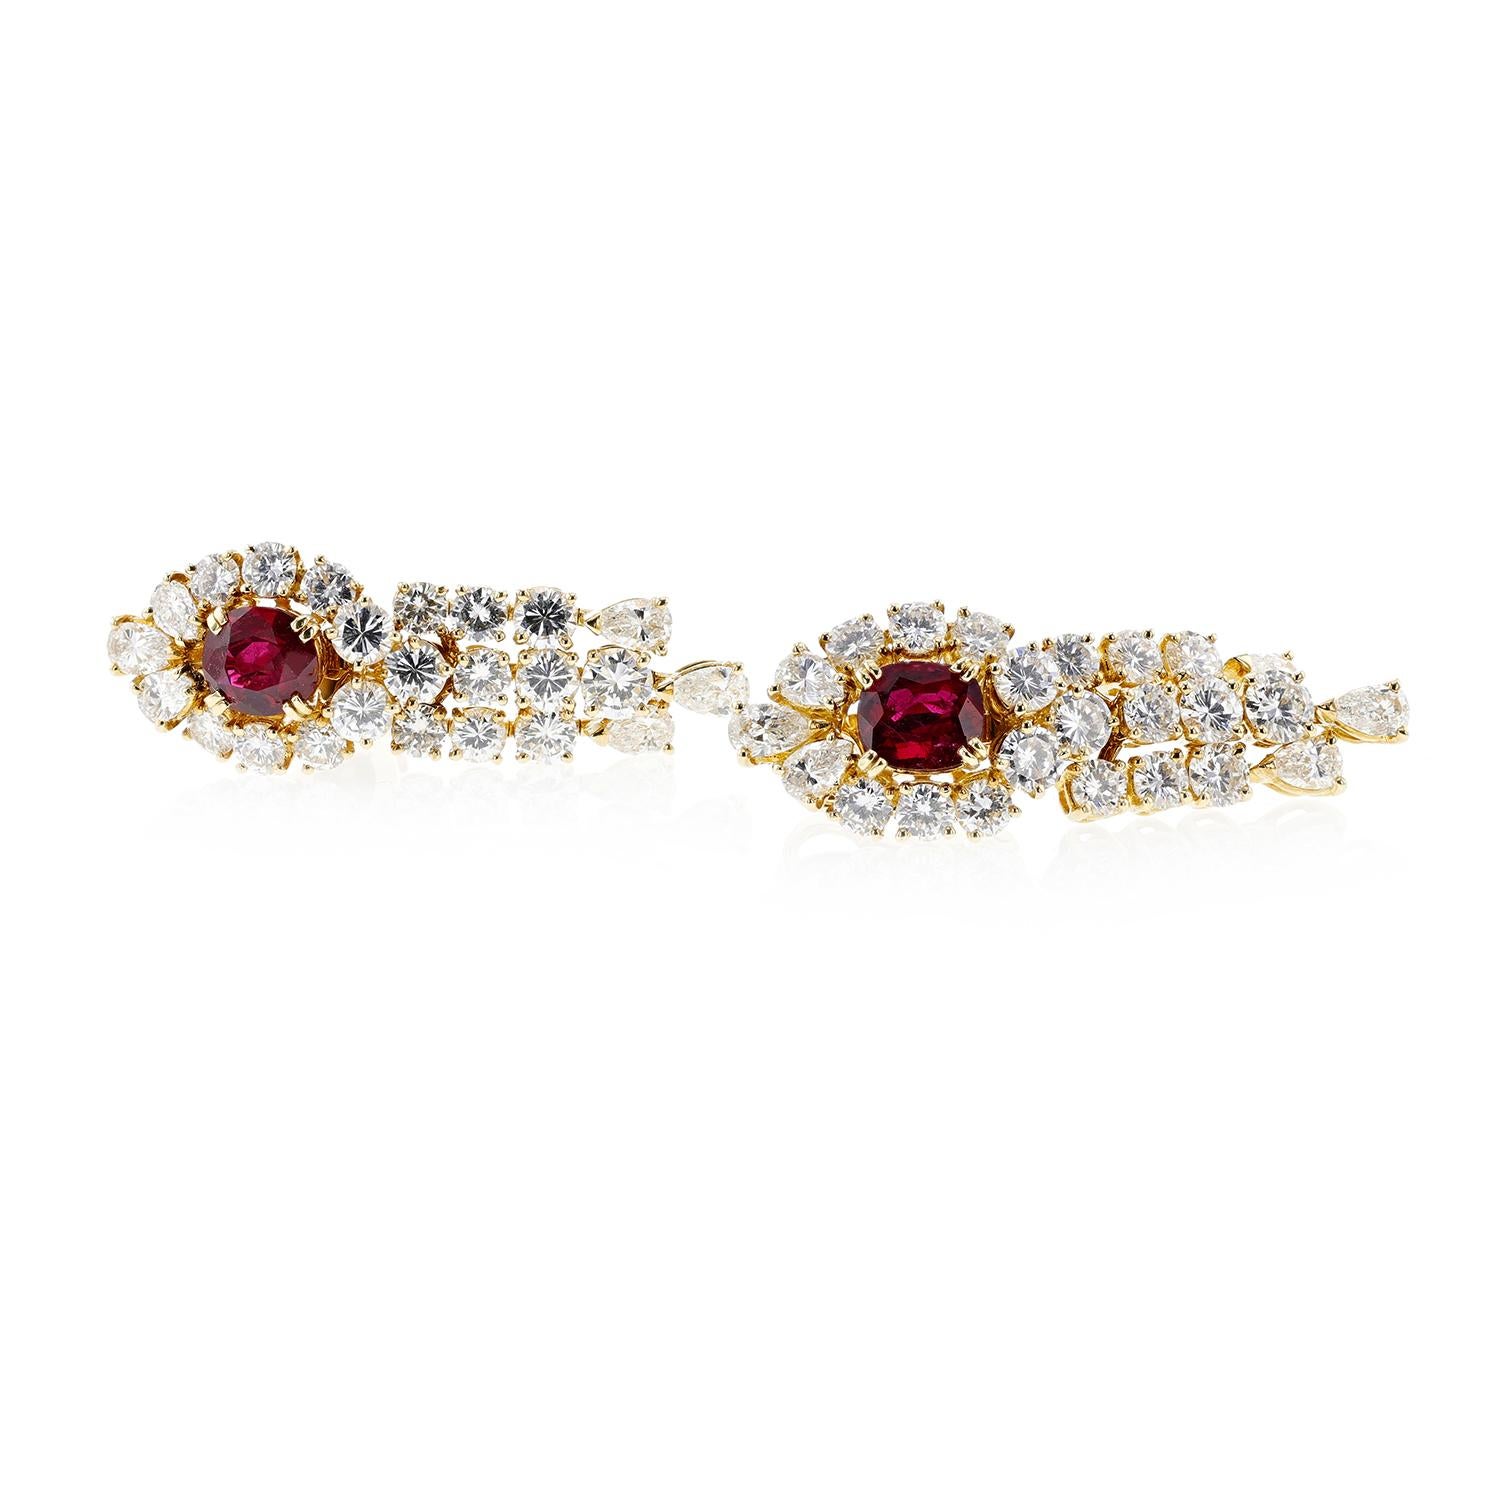 Boucheron Ruby and Diamond Day & Night Earrings, 18k In Excellent Condition For Sale In New York, NY